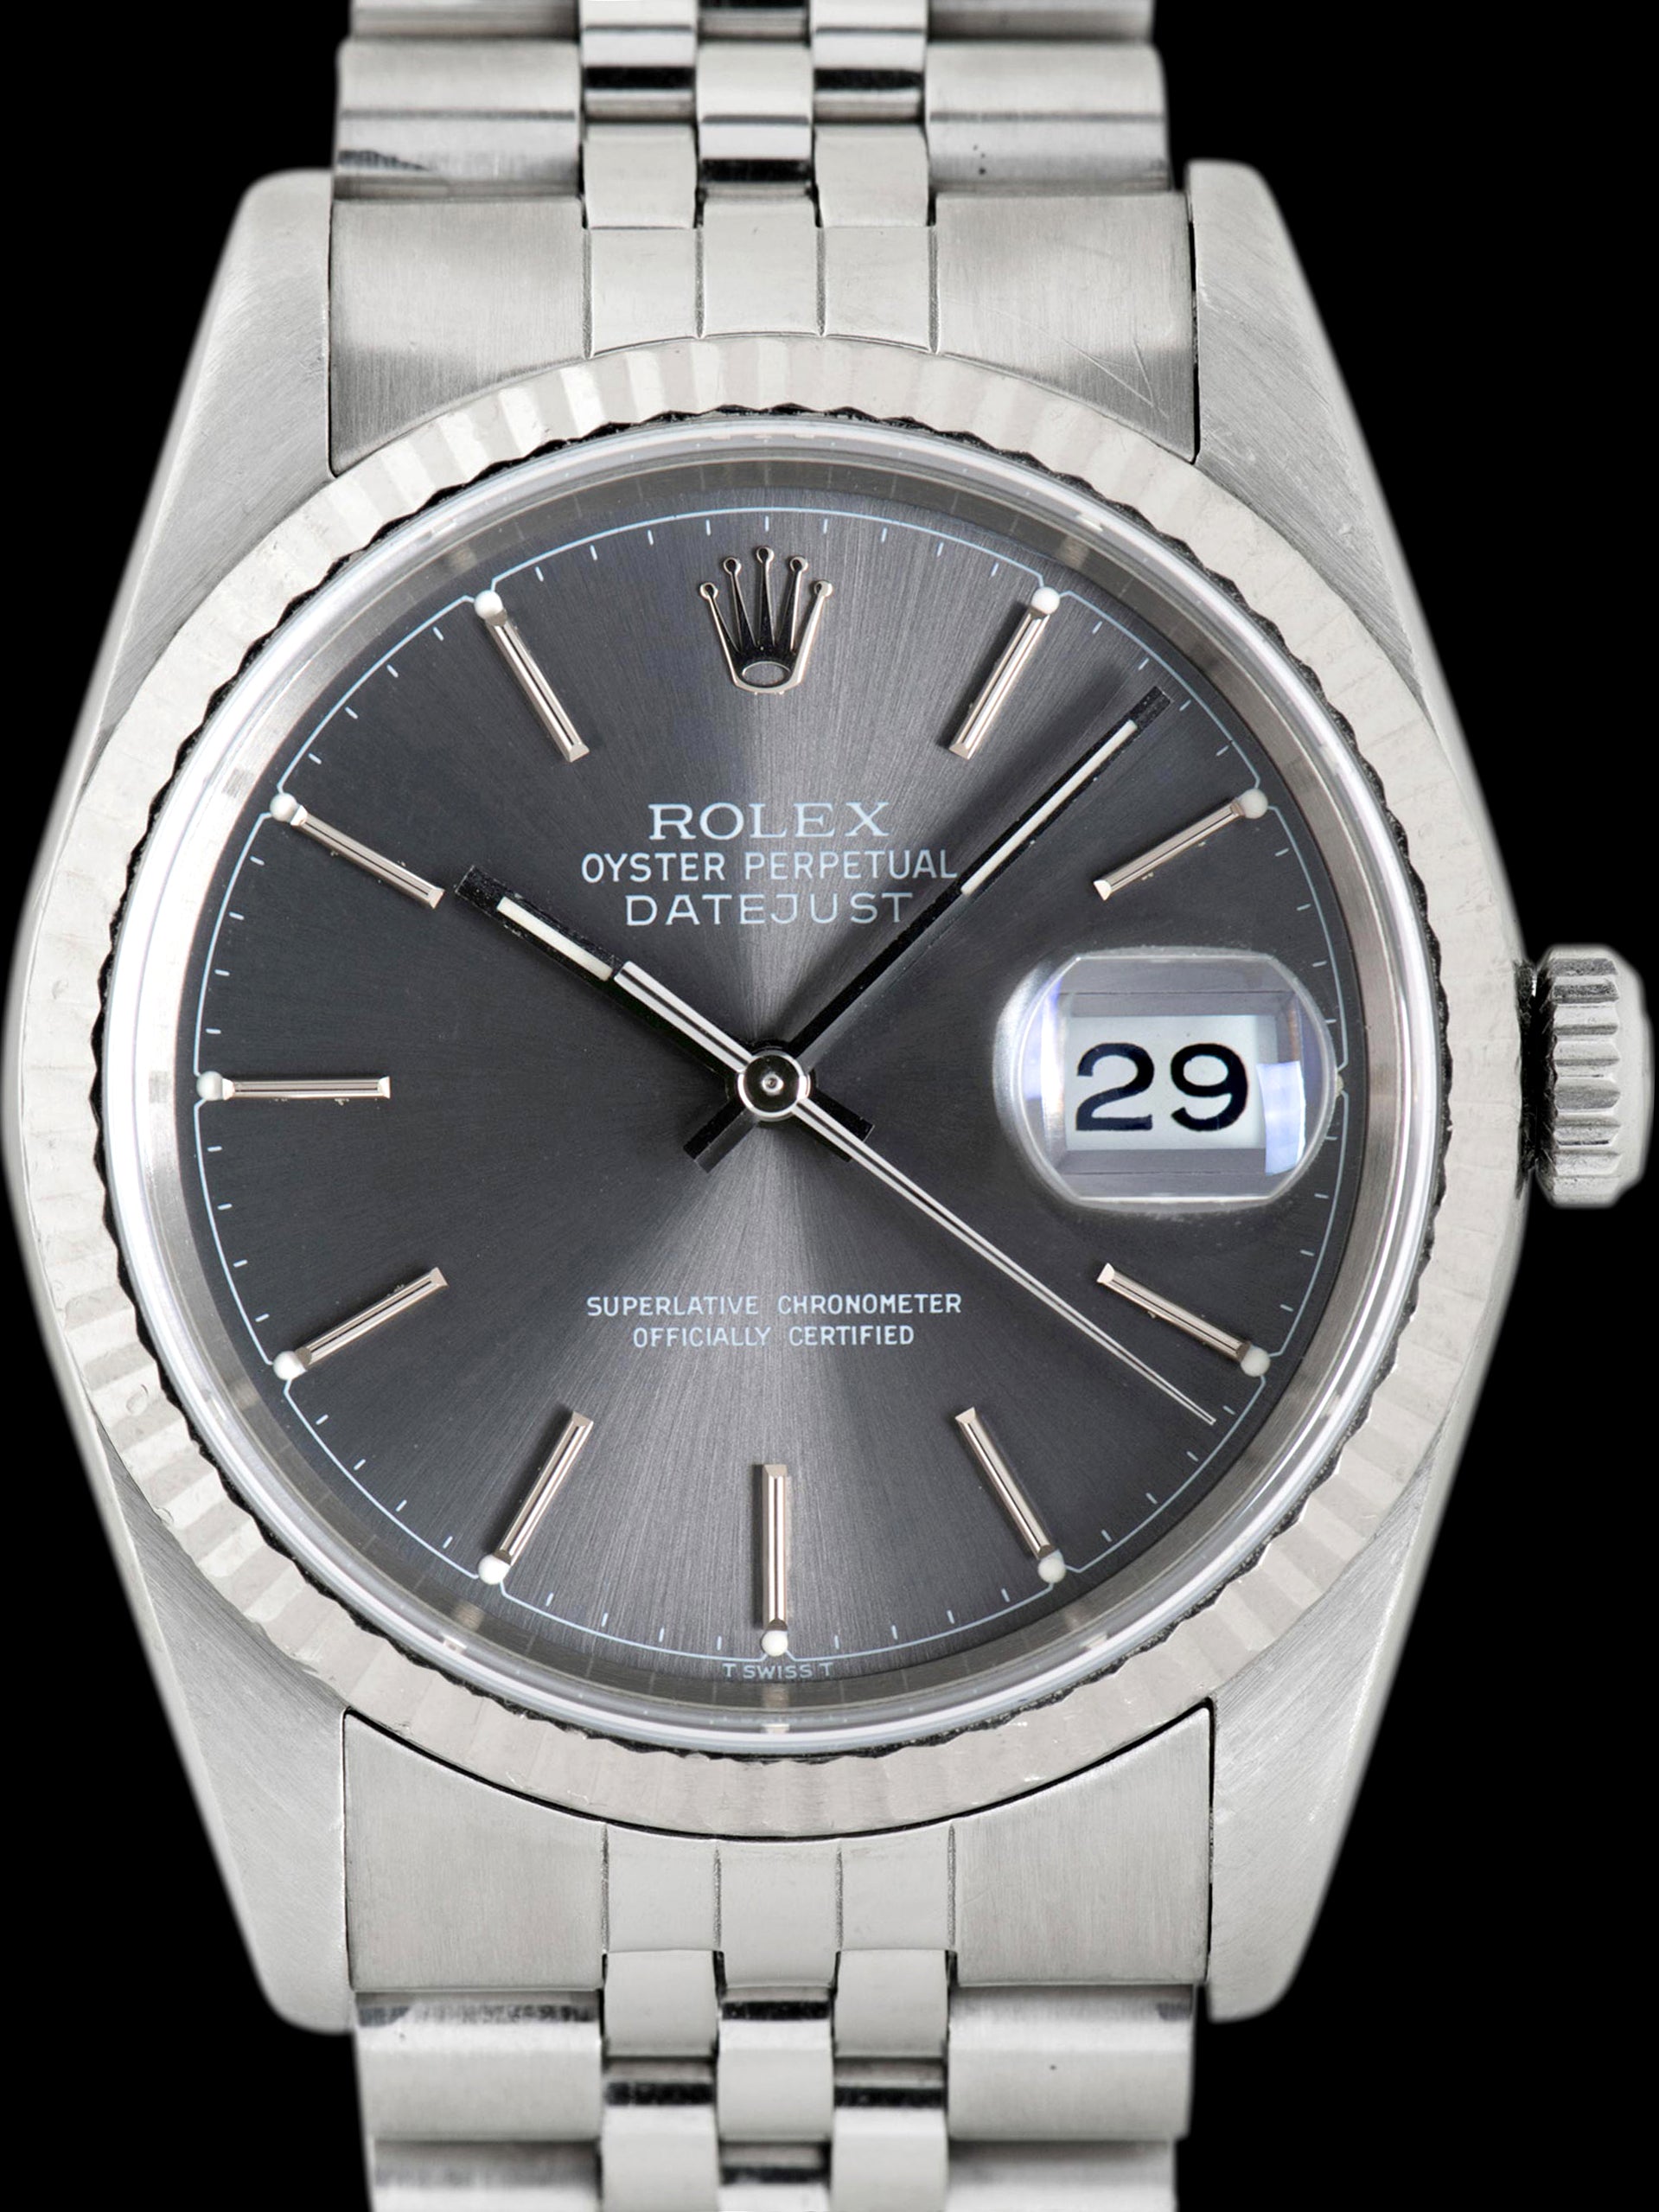 1989 Rolex Datejust (Ref. 16234) Grey "Chapter Ring" Dial W/ Box & Papers